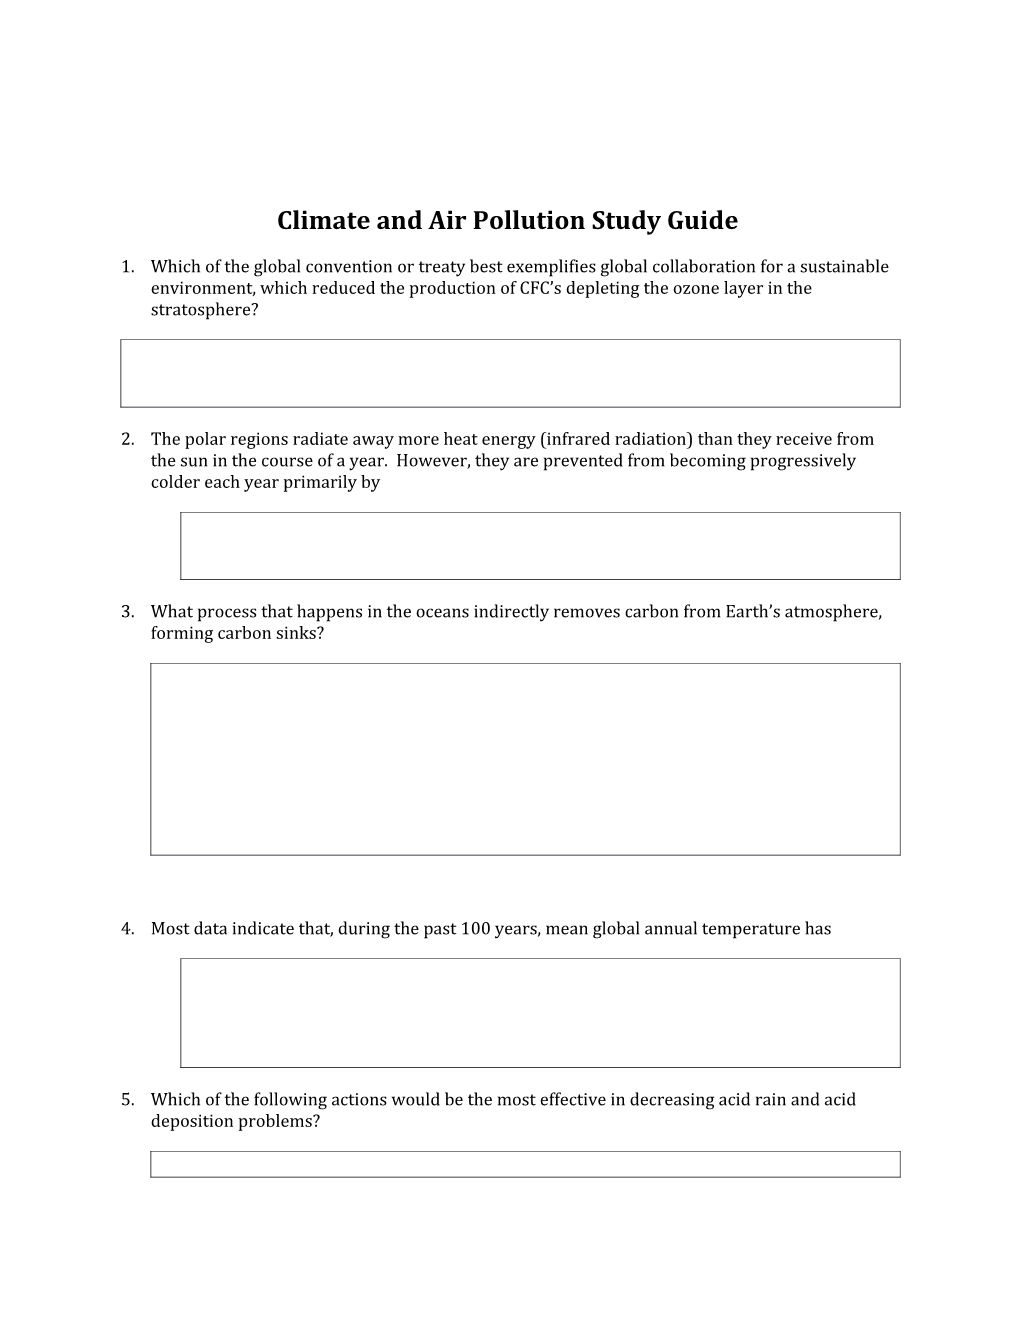 Climate and Air Pollutionstudy Guide